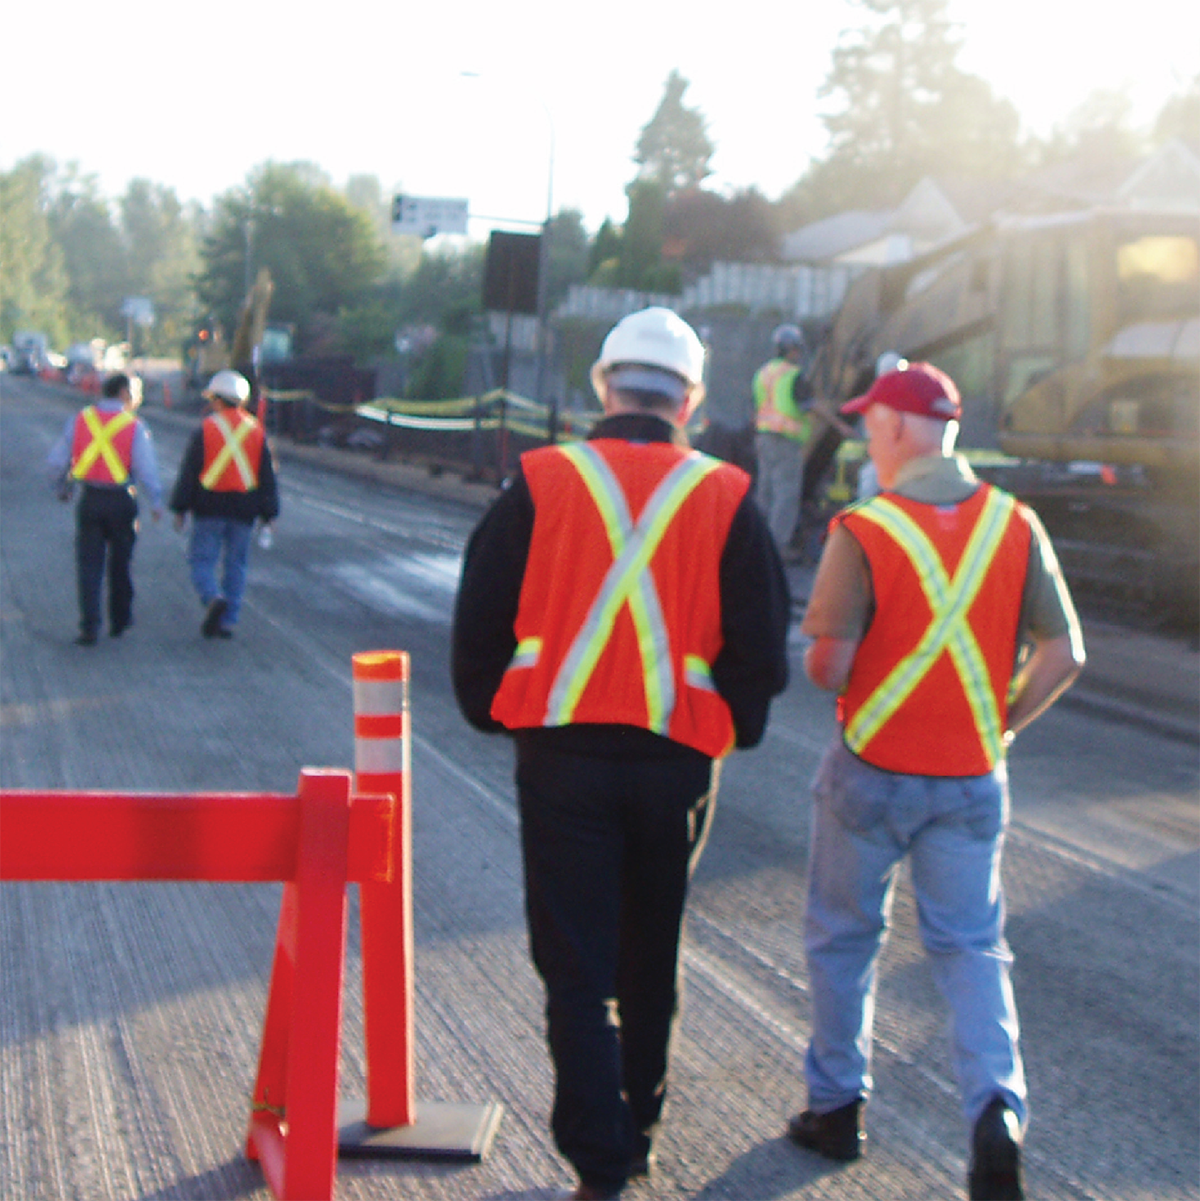 Construction workers wearing reflective vests walking on graded roads